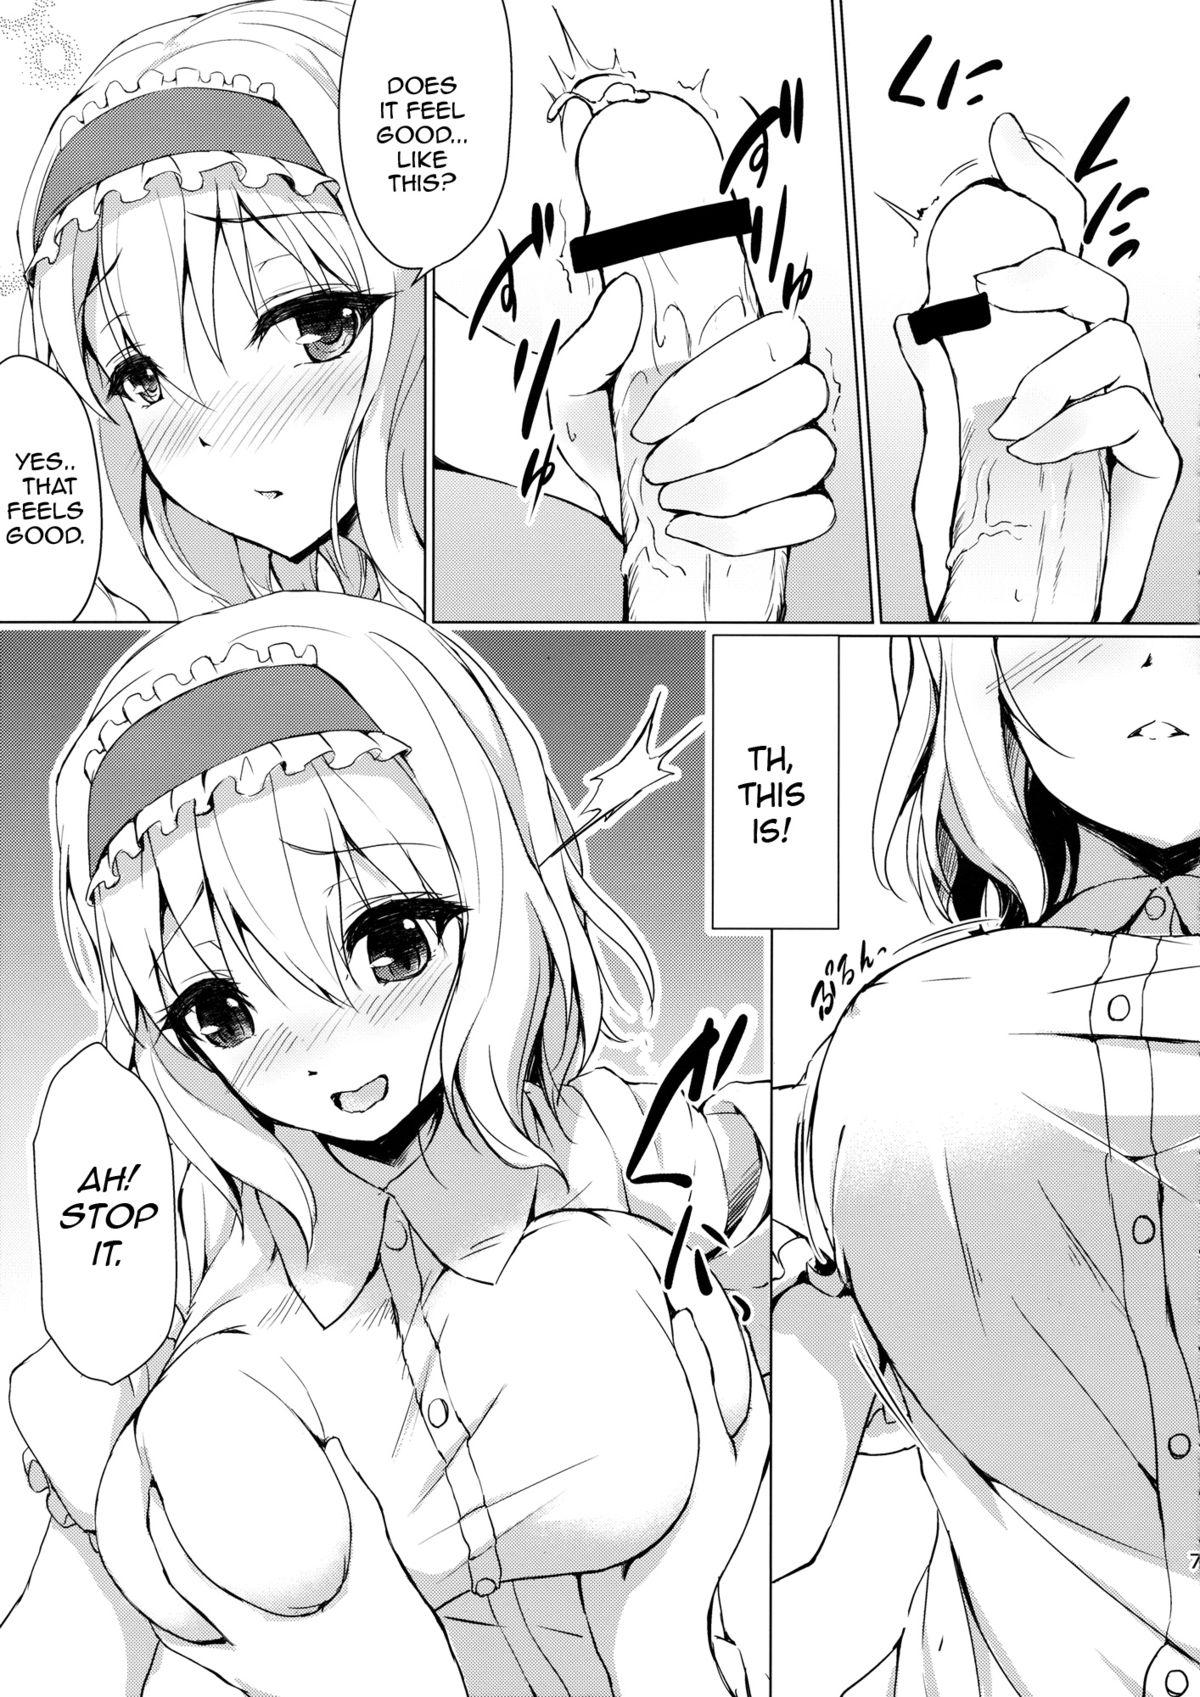 Best Blowjobs Ever Call me, "Alice"! - Touhou project Private - Page 6